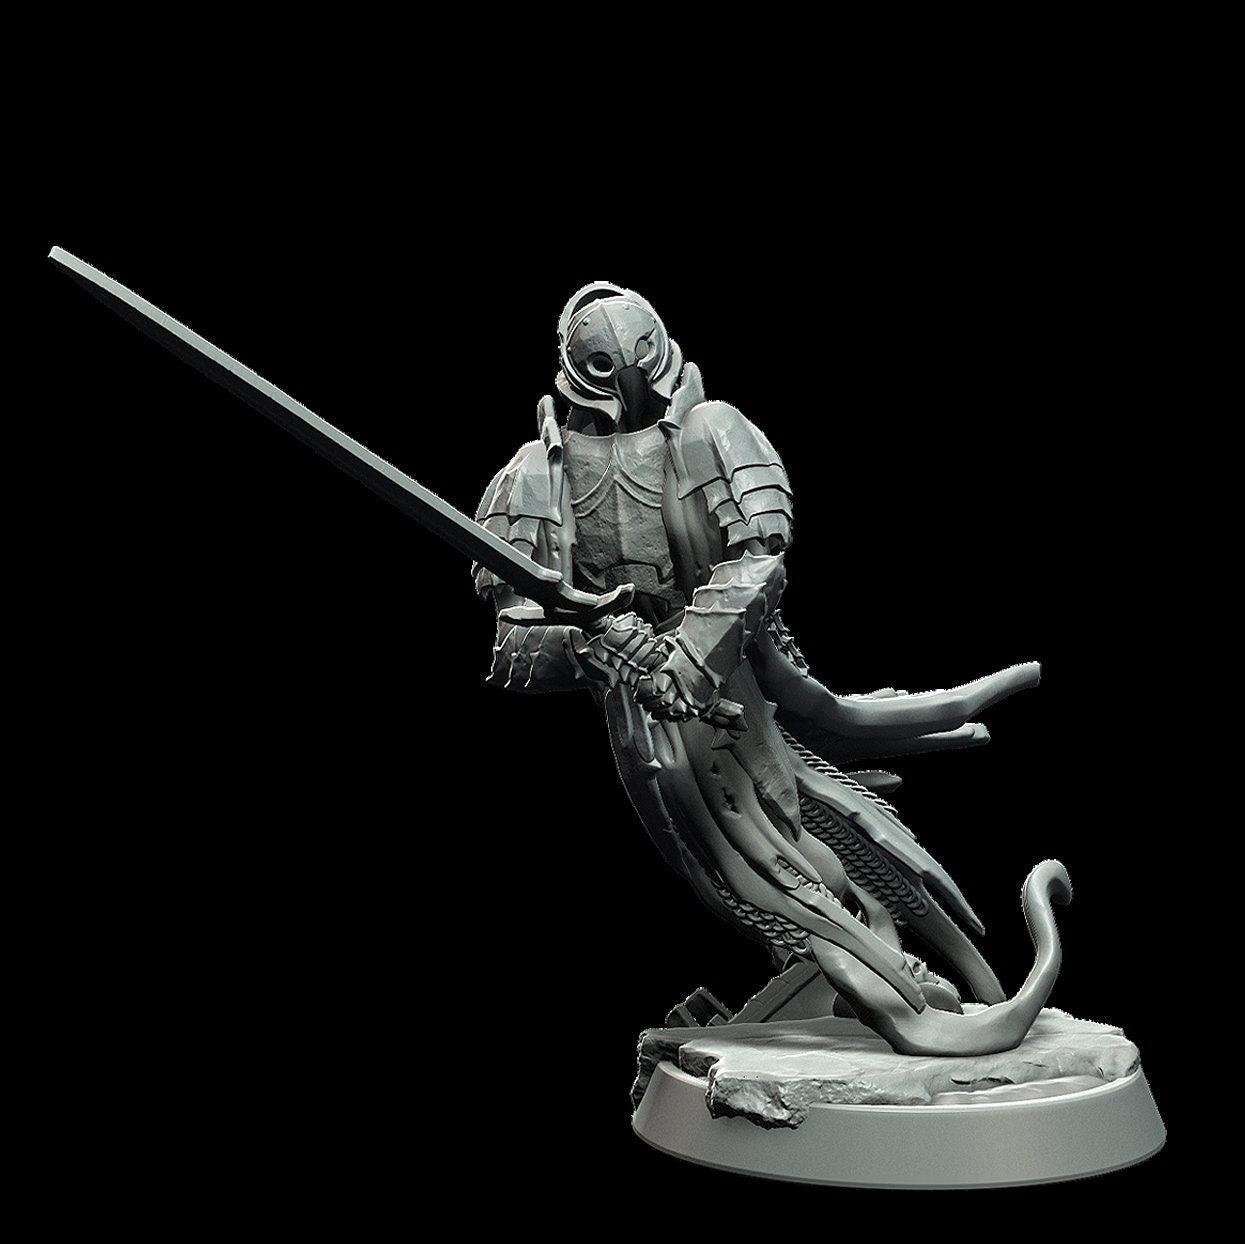 Undead Miniature Skeleton Miniature Phantom Miniature - 3 Poses - 28mm scale Tabletop gaming DnD Miniature Dungeons and Dragons,dnd 5e - Plague Miniatures shop for DnD Miniatures